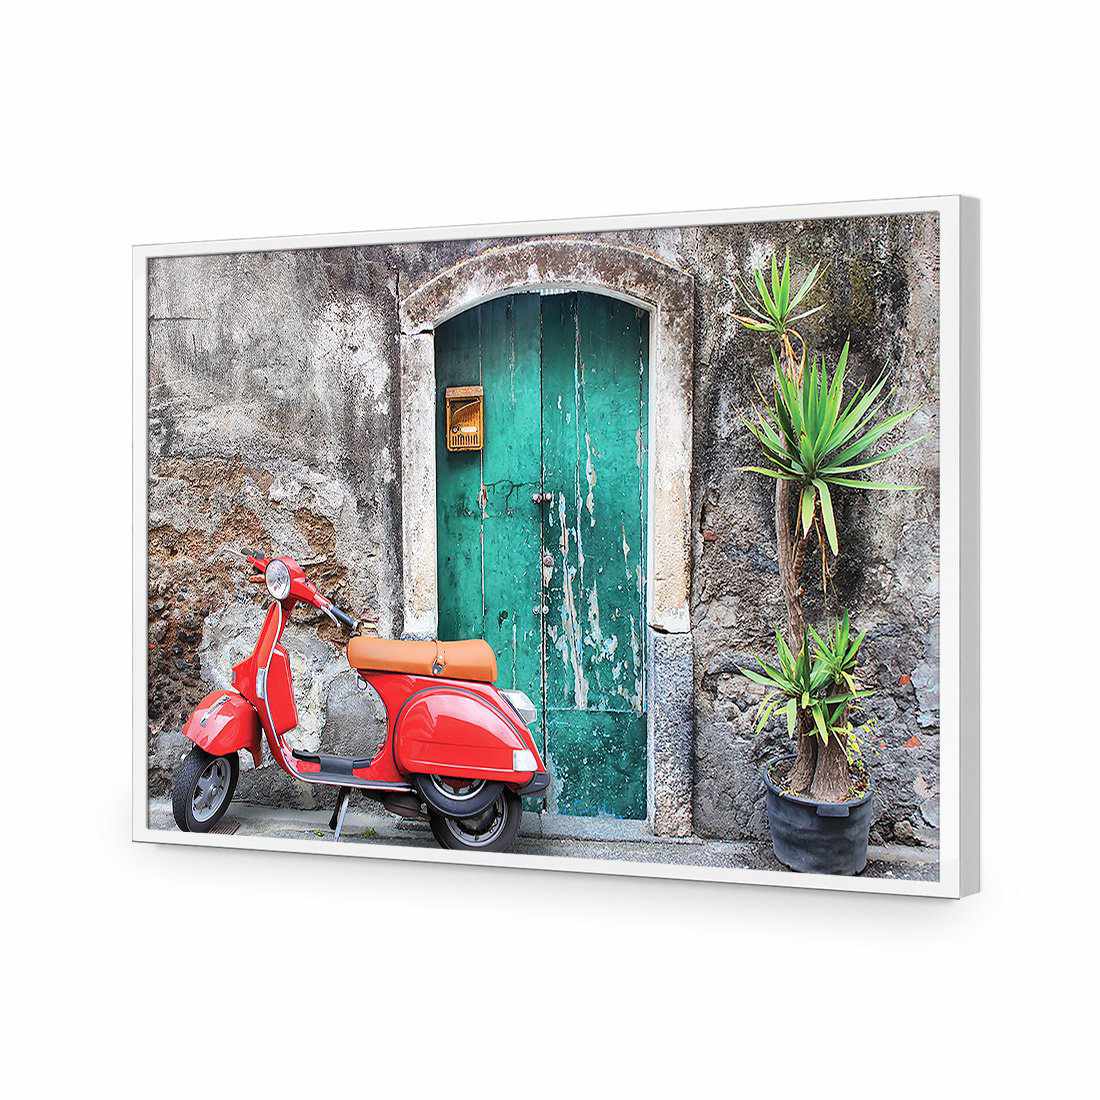 Vintage Door And Scooter-Acrylic-Wall Art Design-Without Border-Acrylic - White Frame-45x30cm-Wall Art Designs